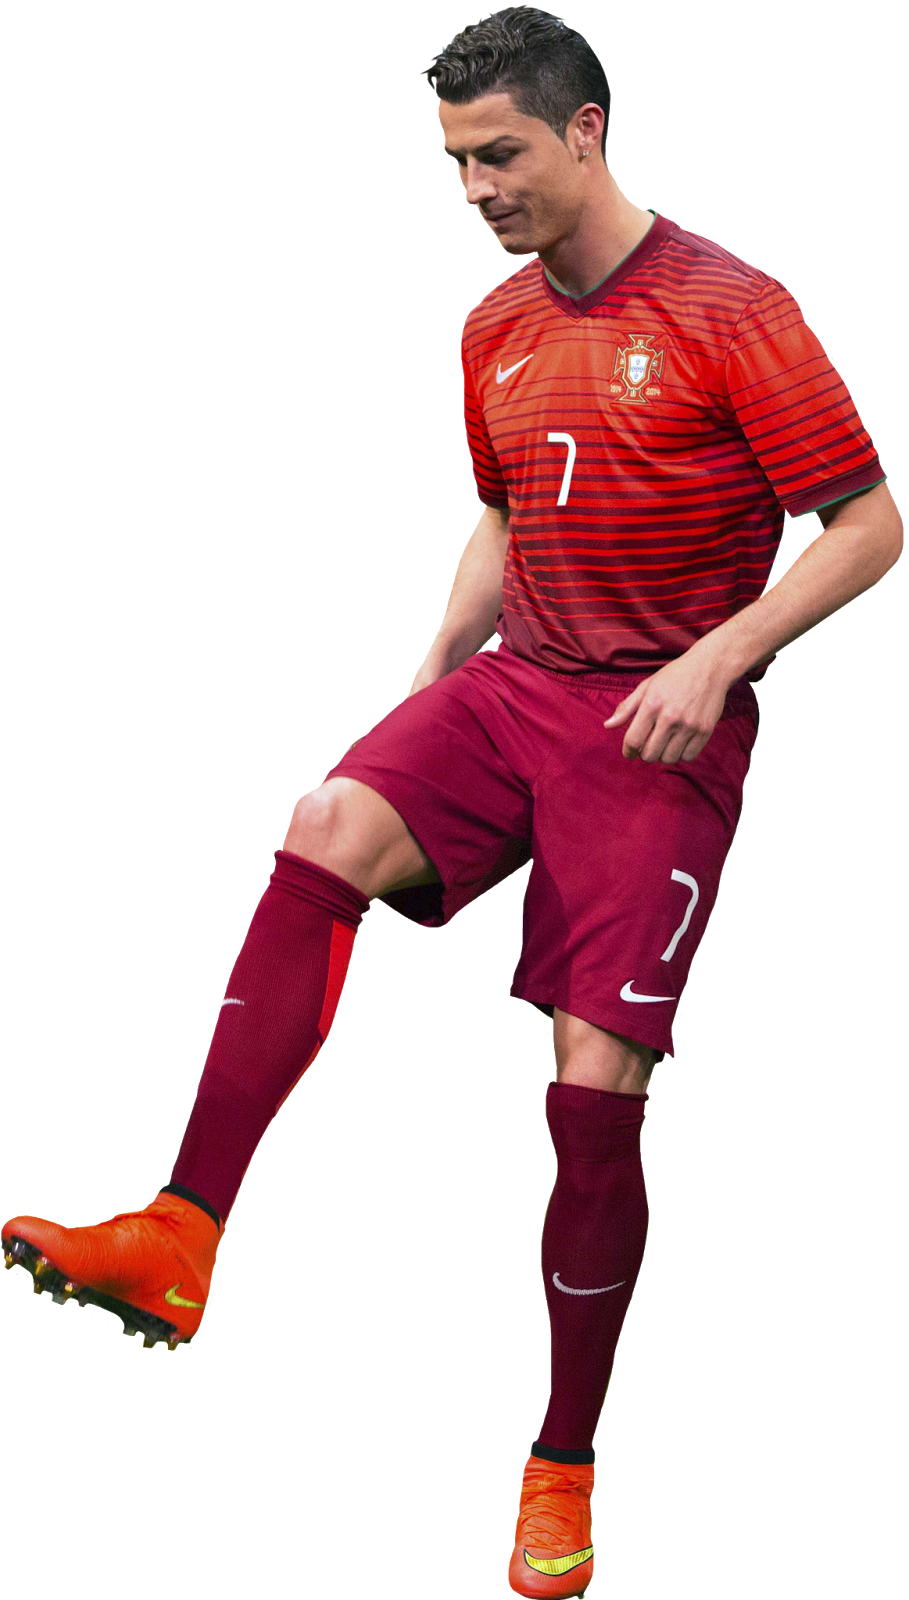 Download Cristiano Ronaldo PNG Images - Free Icons and PNG ...